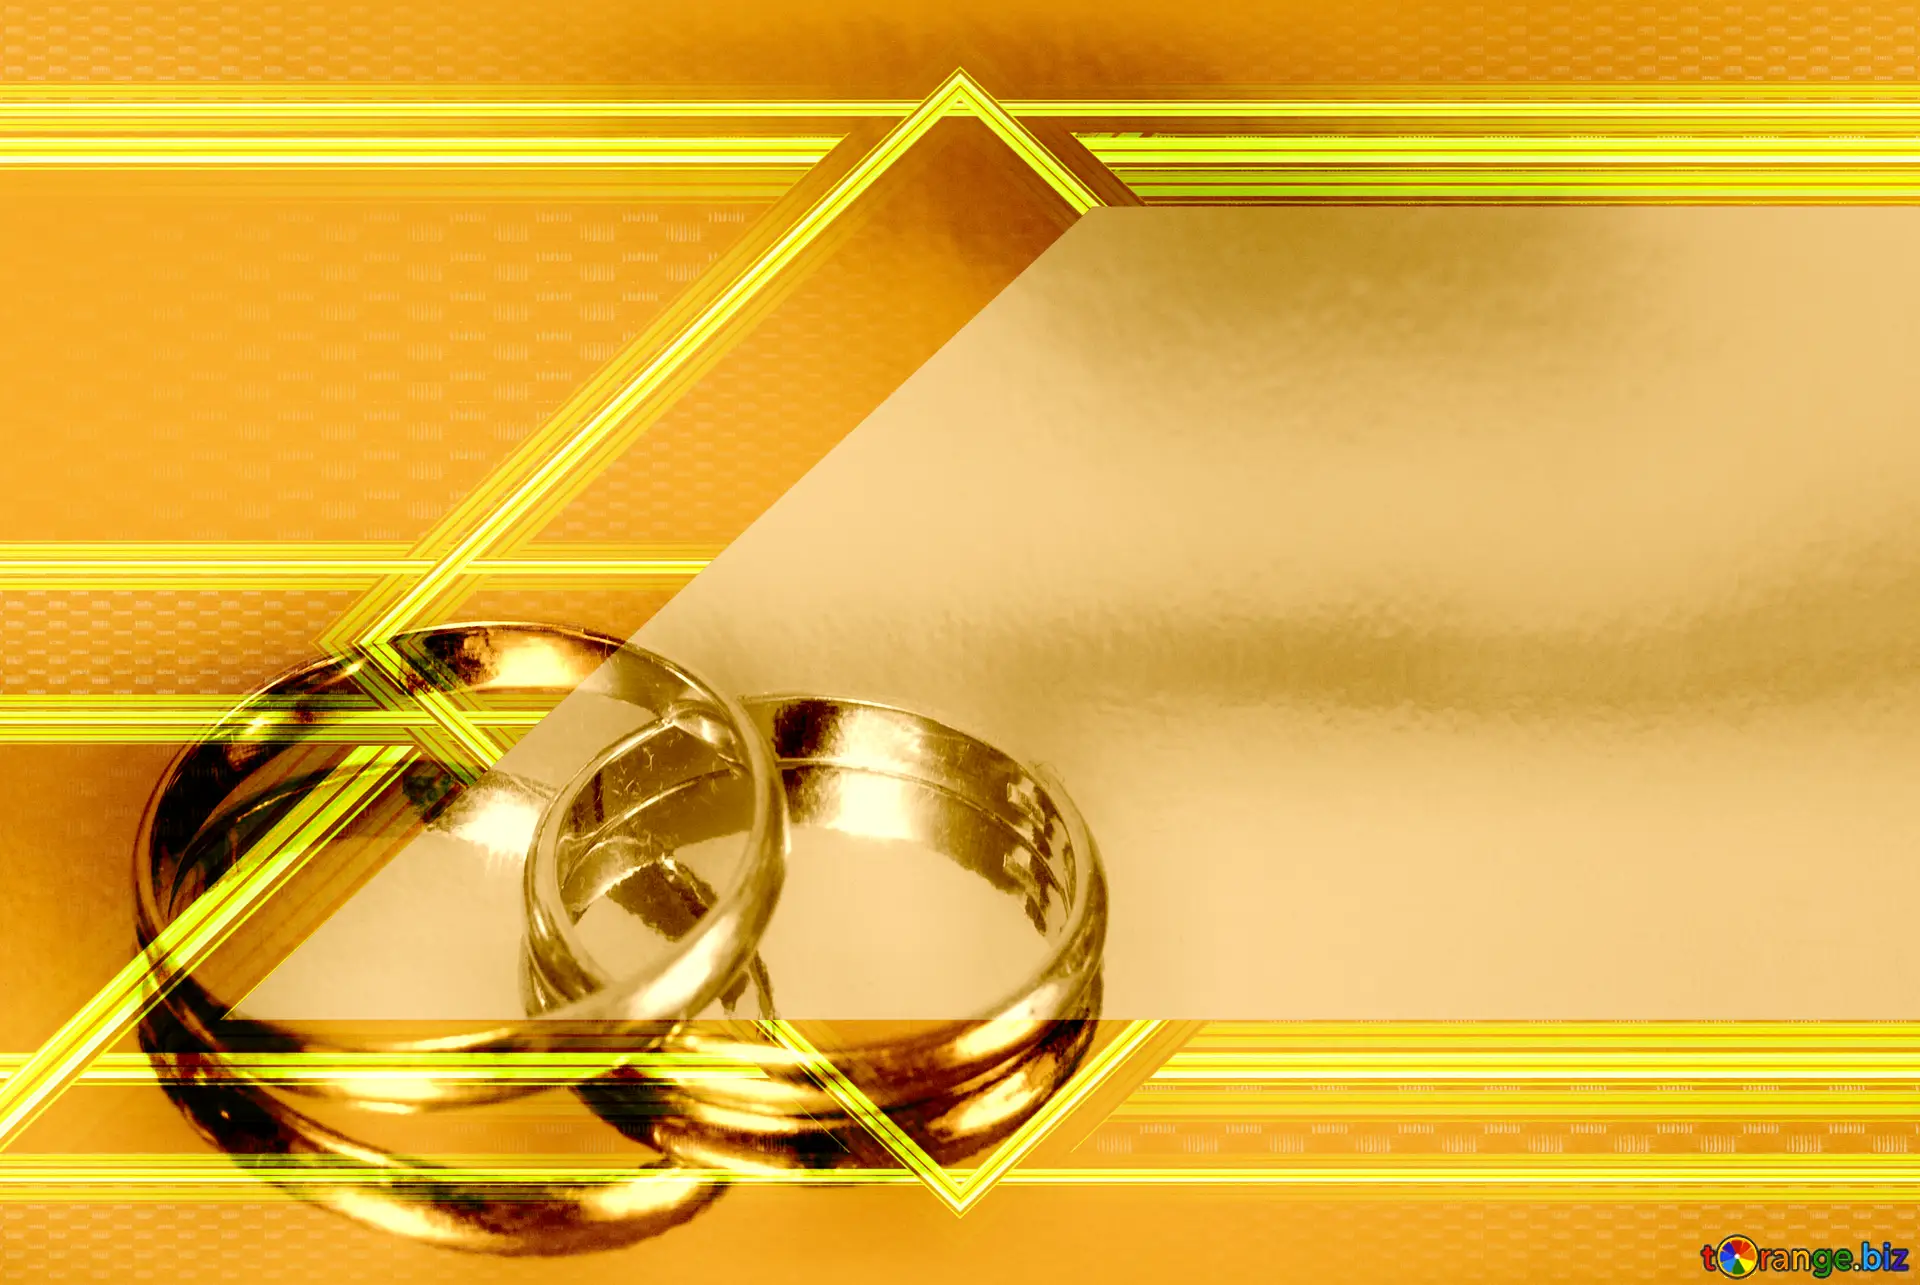 Download Diamond Gold Wedding Rings Picture | Wallpapers.com